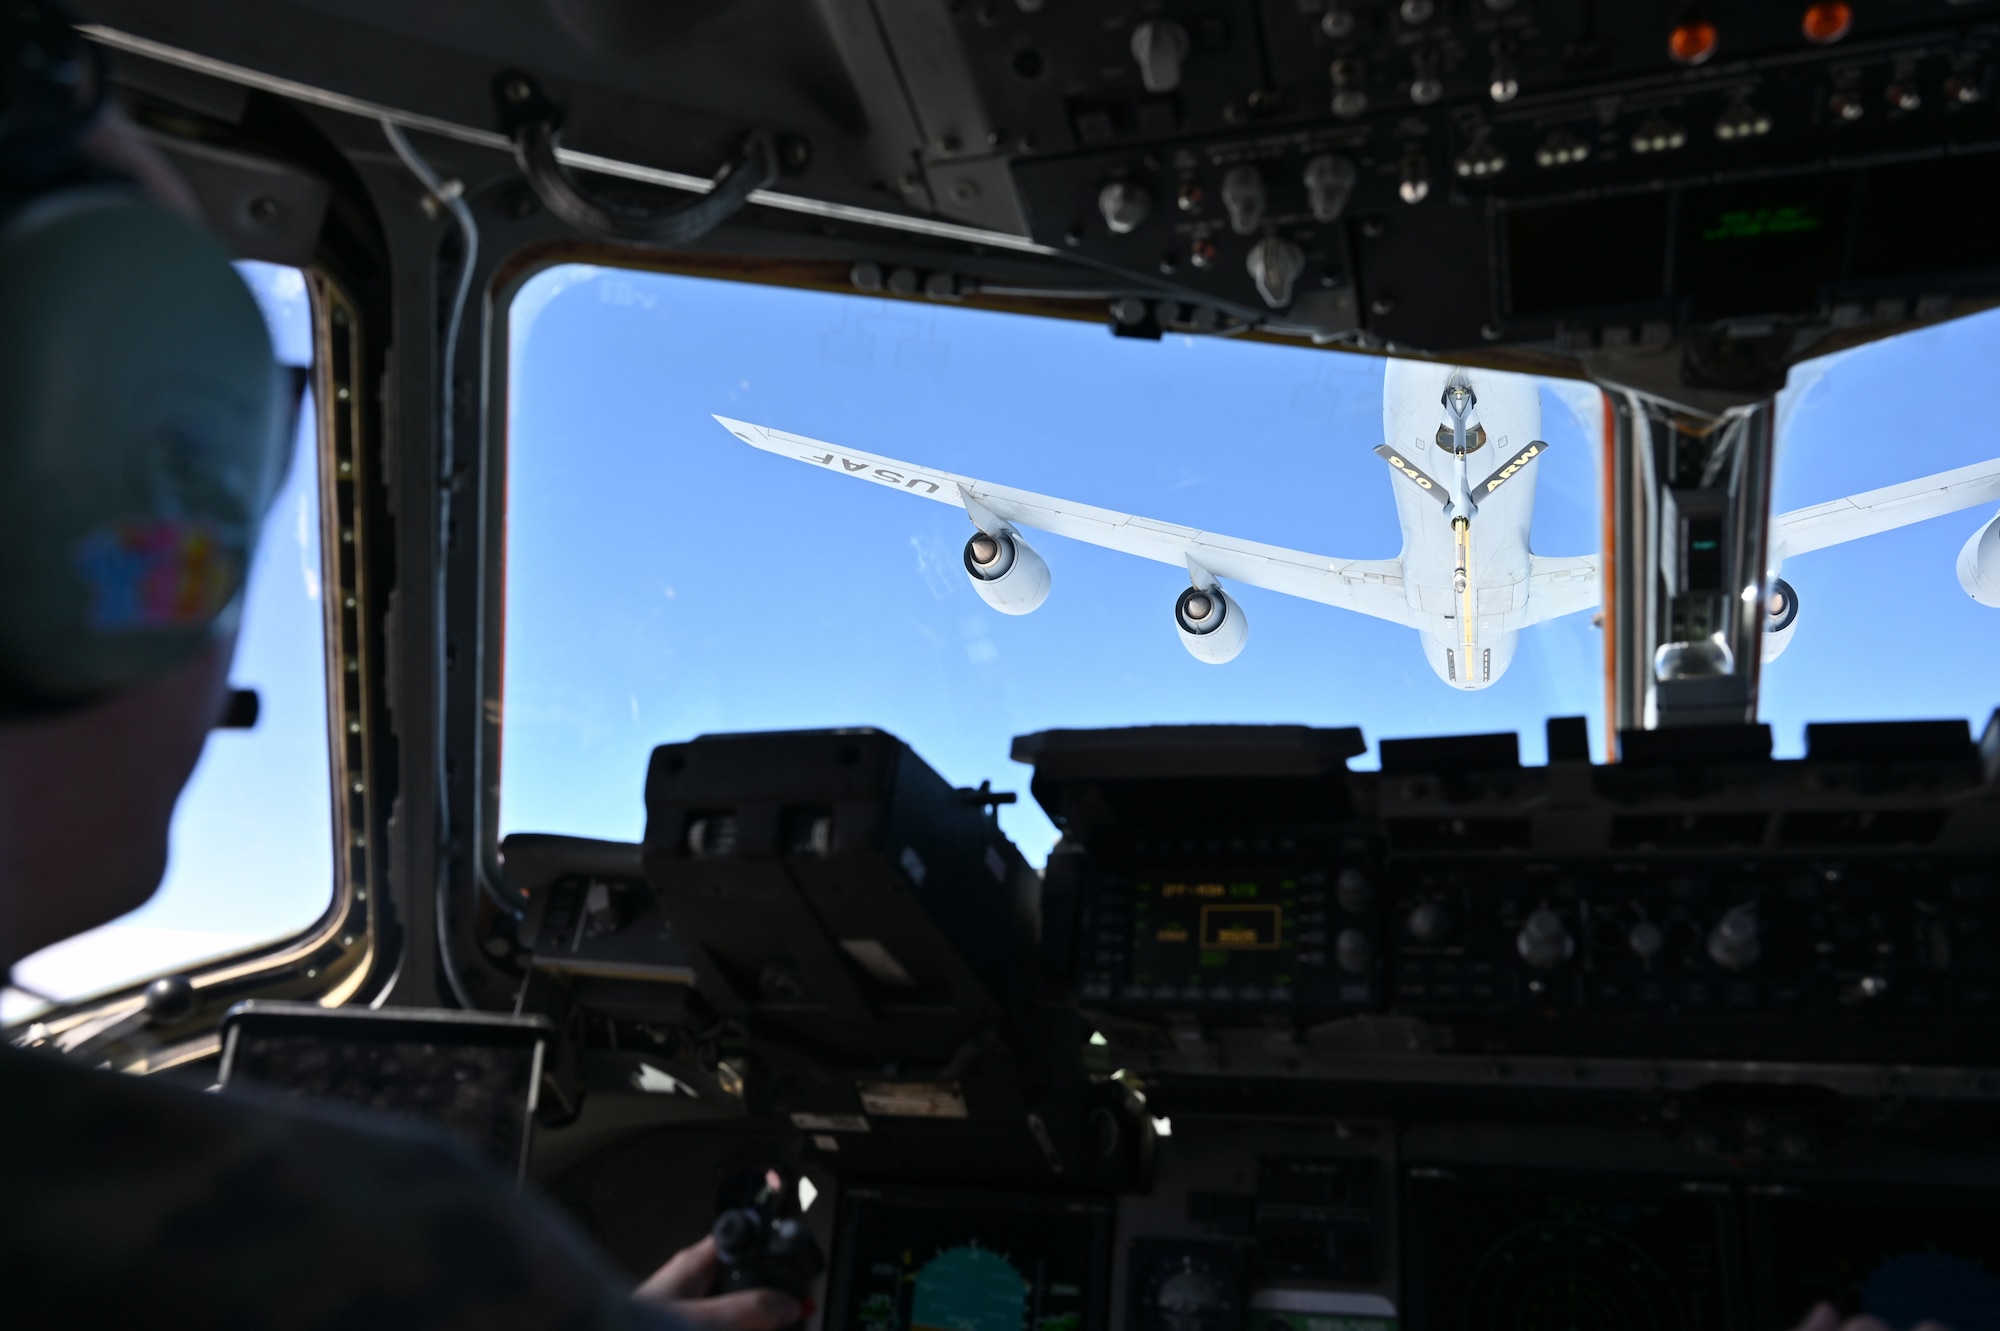 A KC-135 Stratotanker hovers above a C-17 Globemaster as seen through the cockpit window.